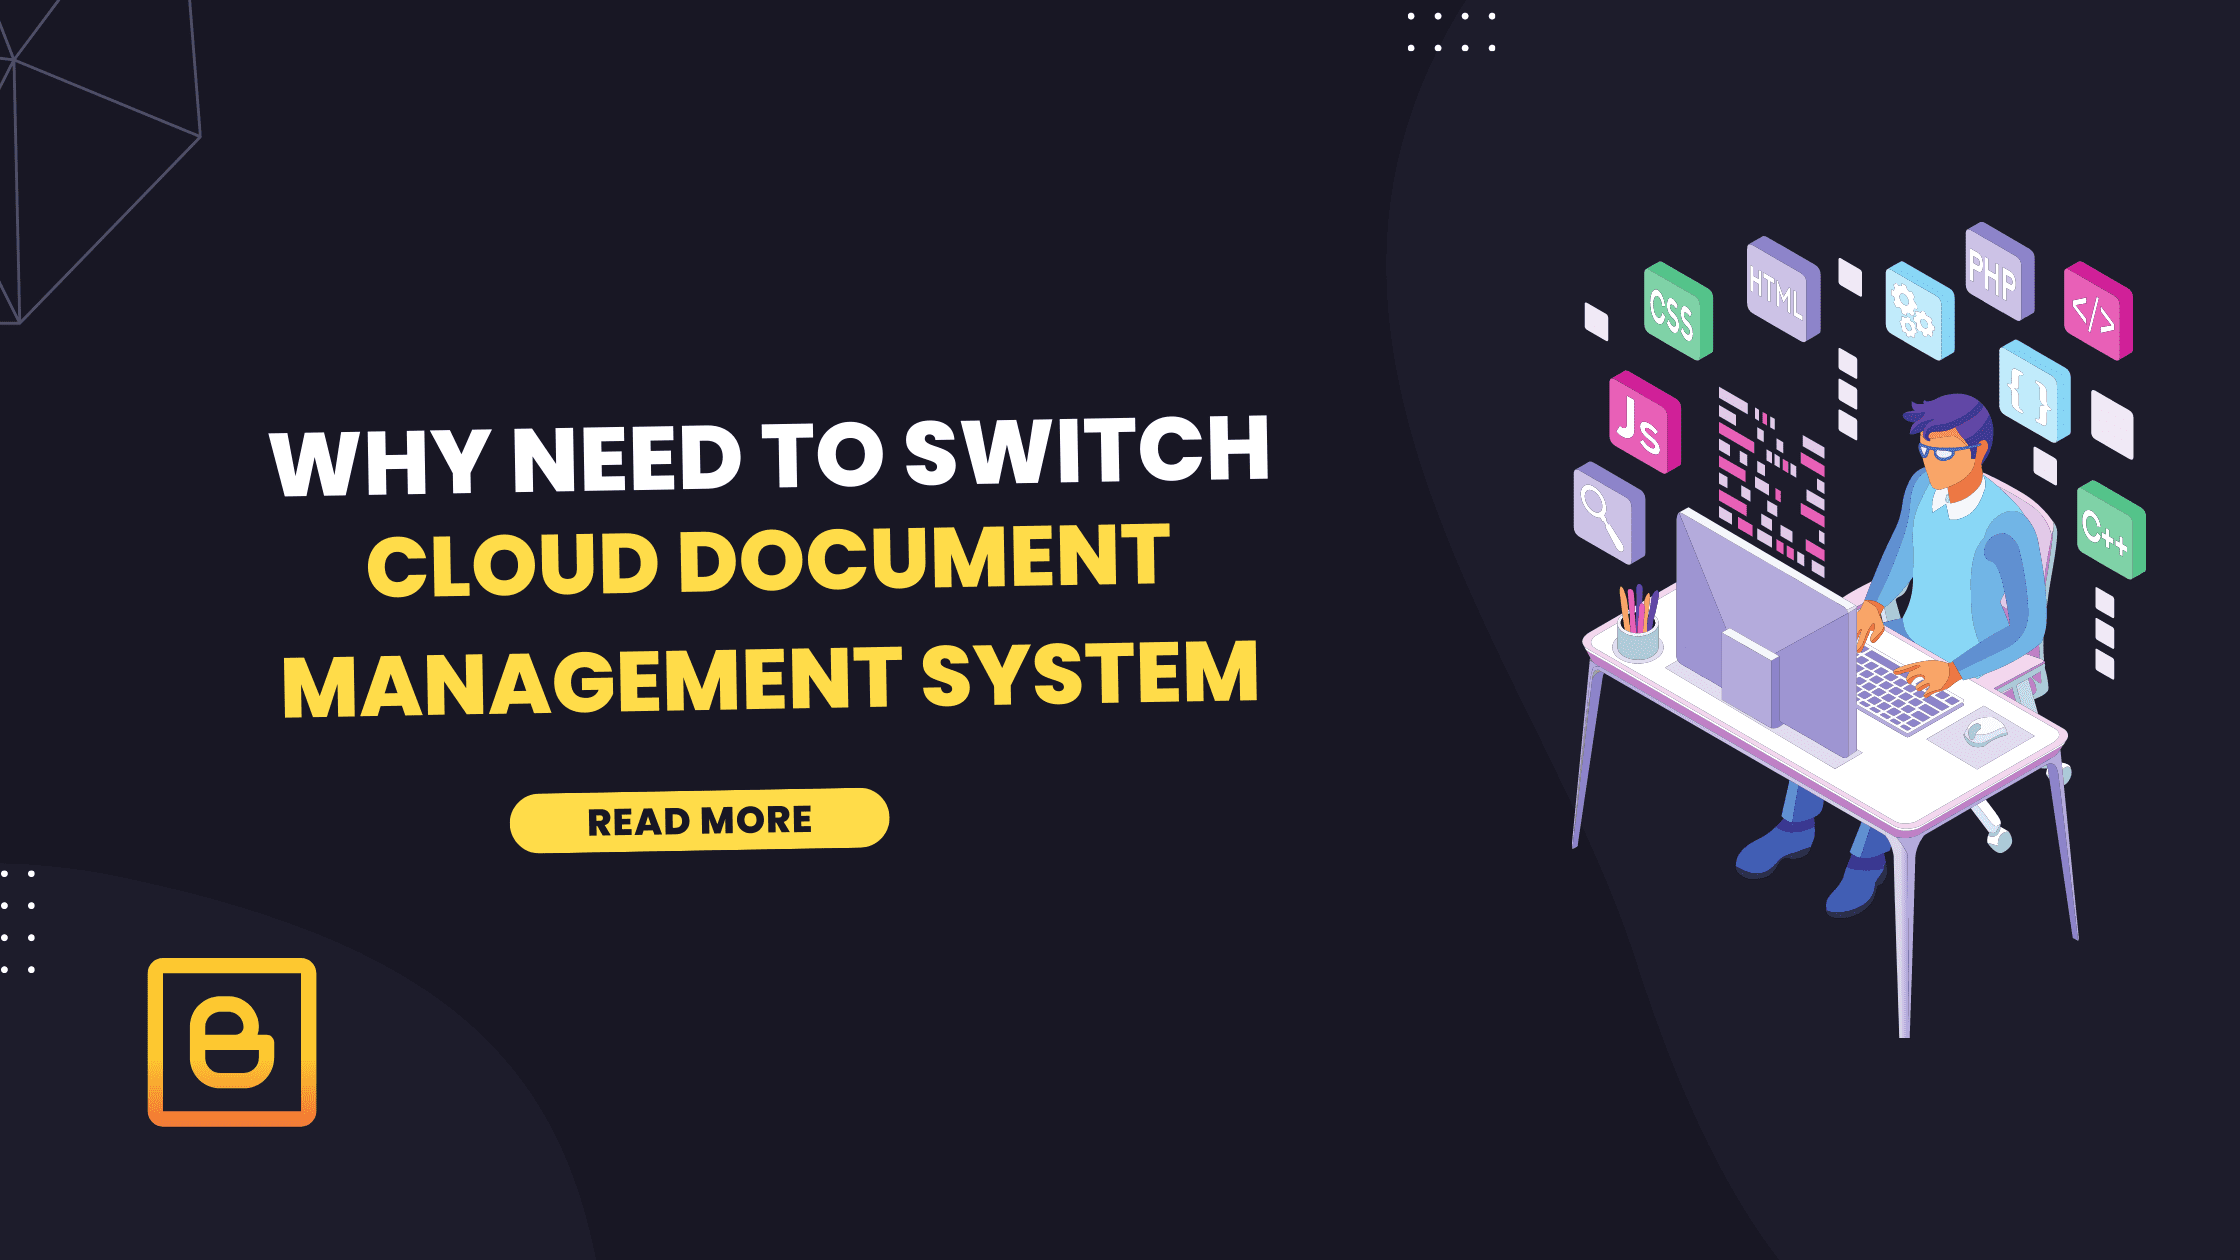 Why do You need To Switch To Cloud Document Management System?